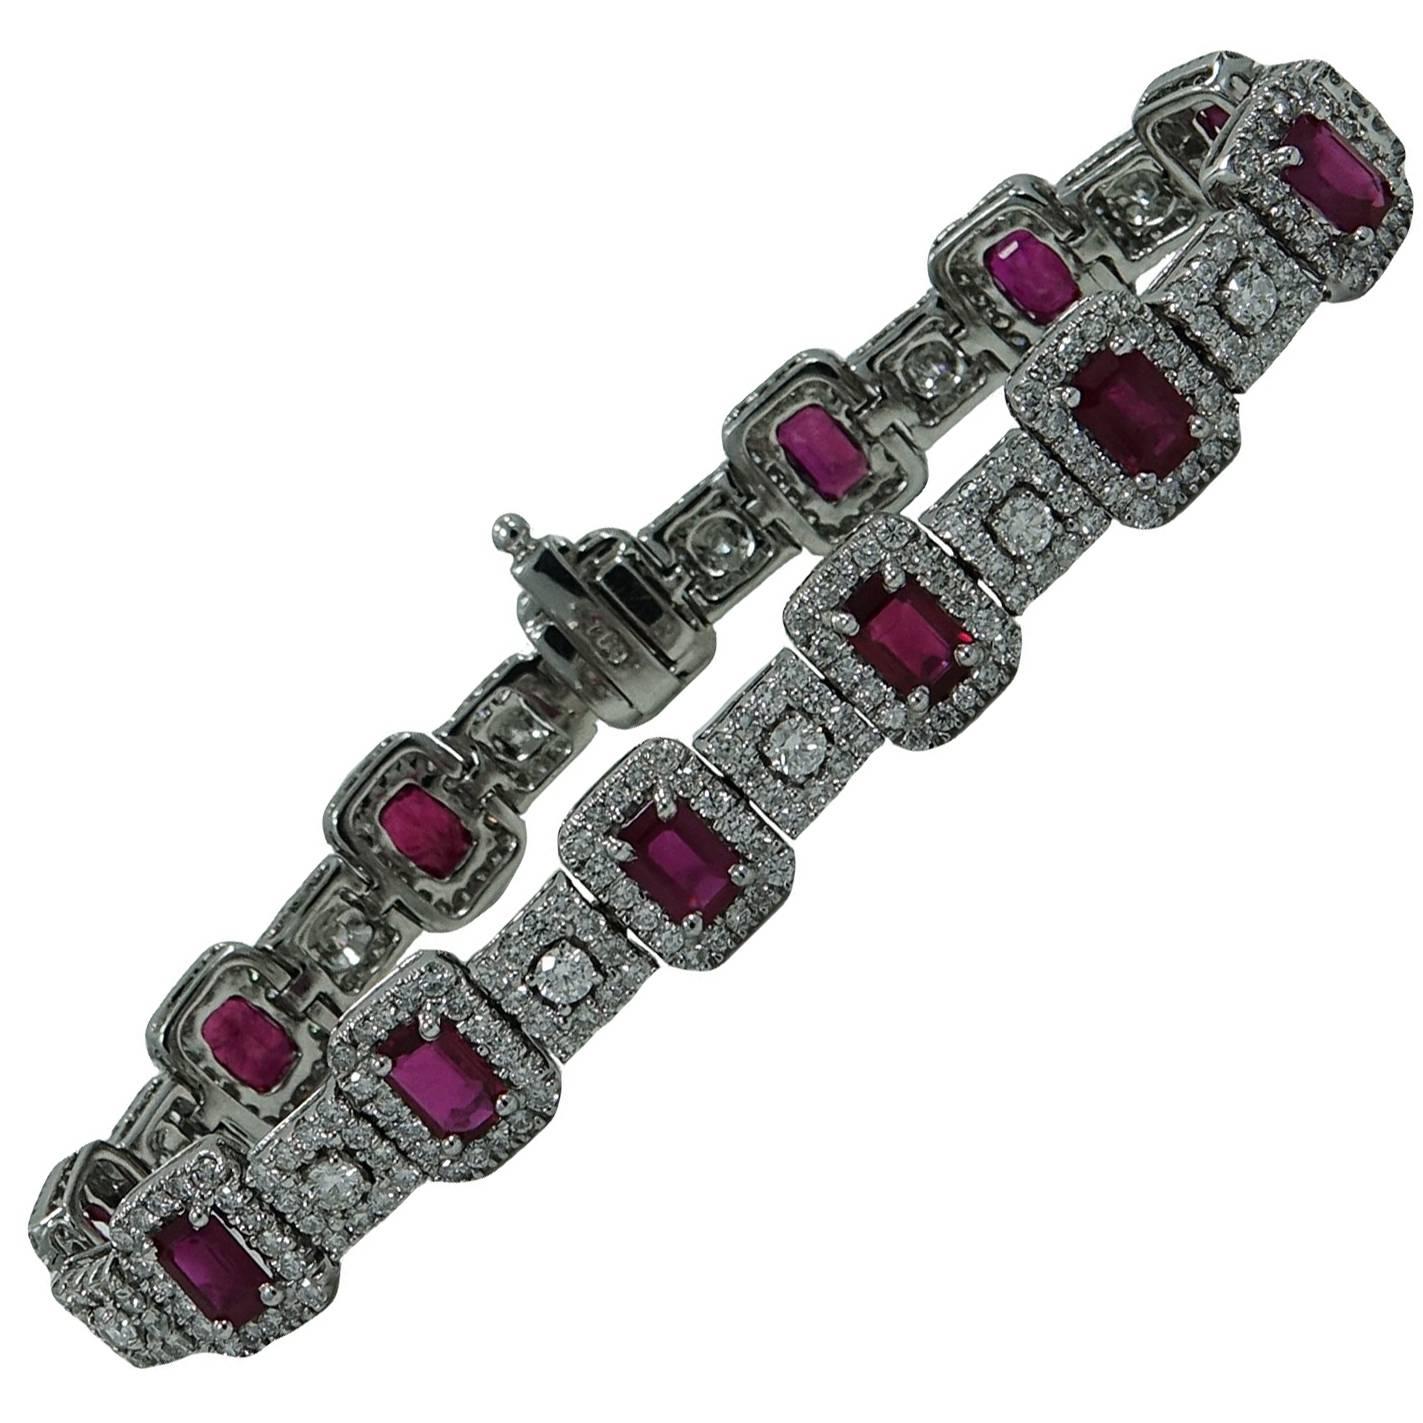 Rubies and Diamonds White Gold Bracelet For Sale